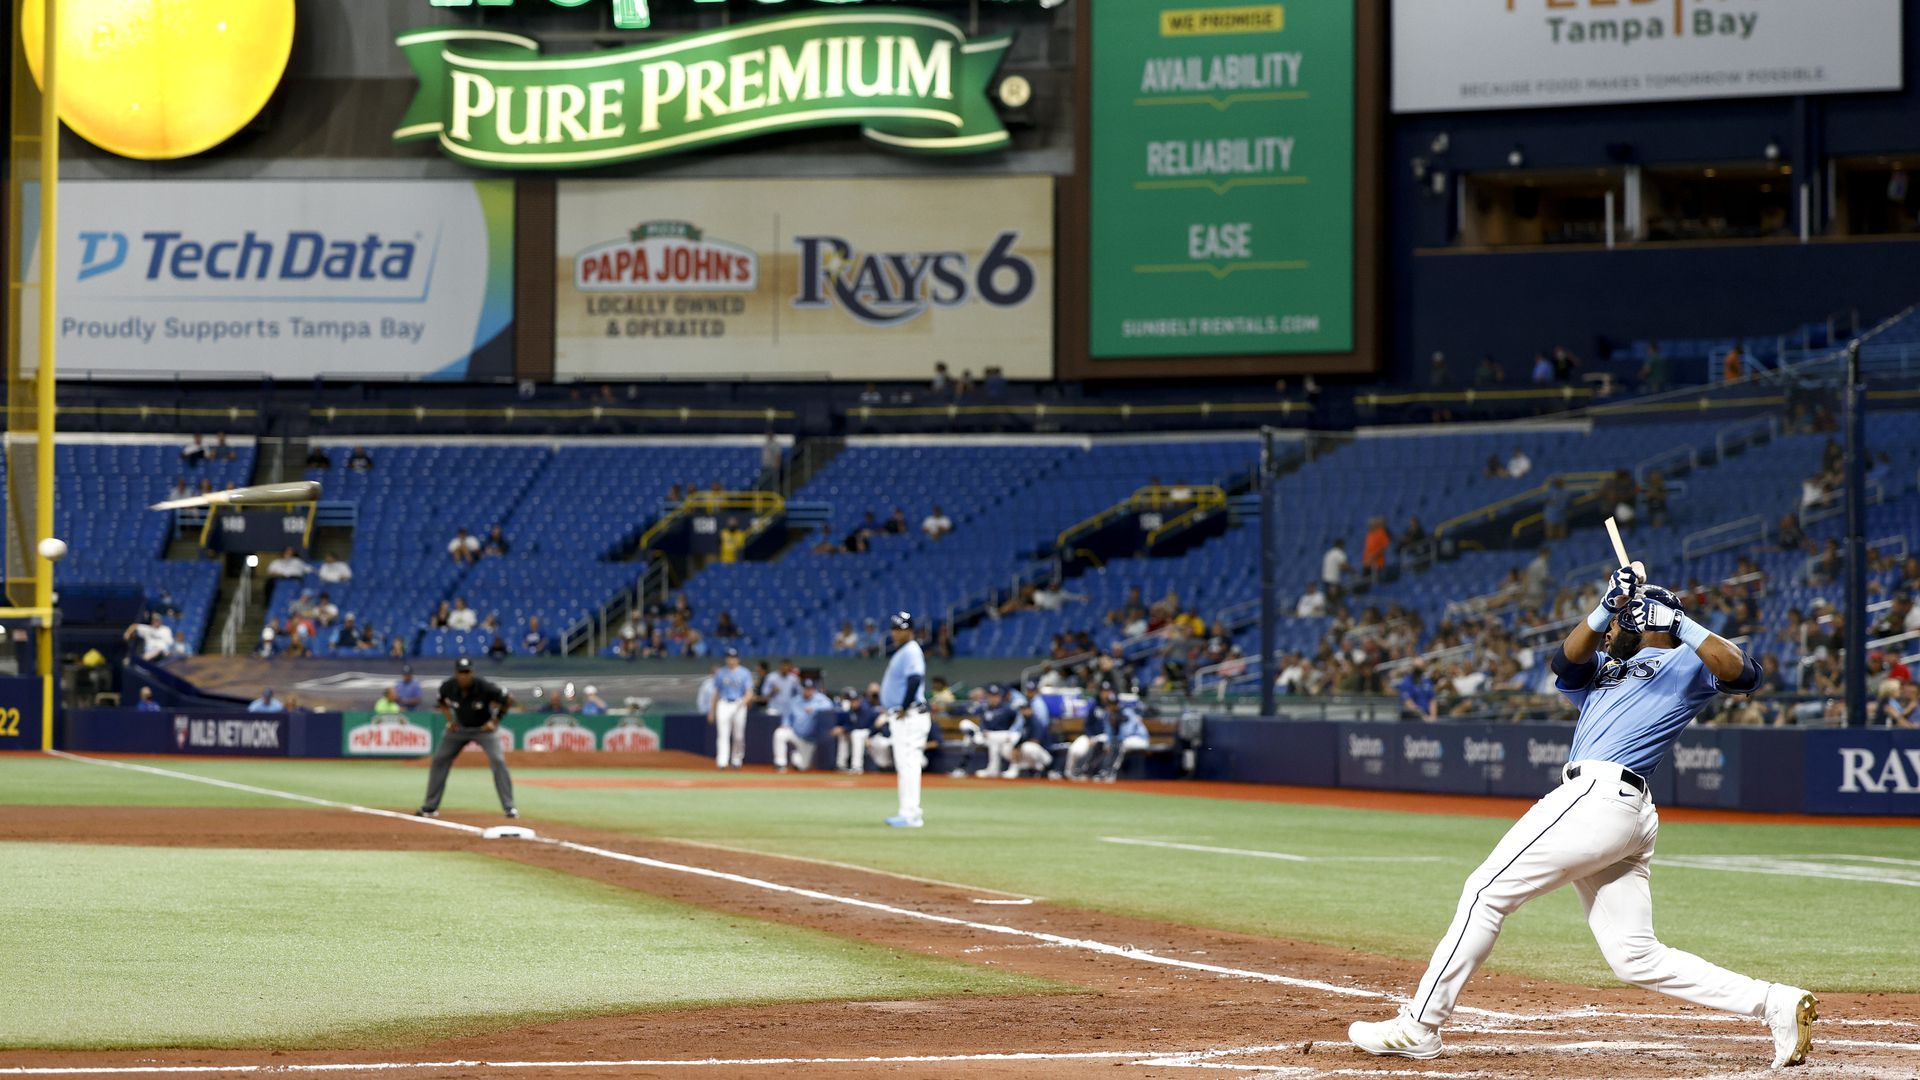 The red-hot Tampa Bay Rays are still struggling to fill Tropicana